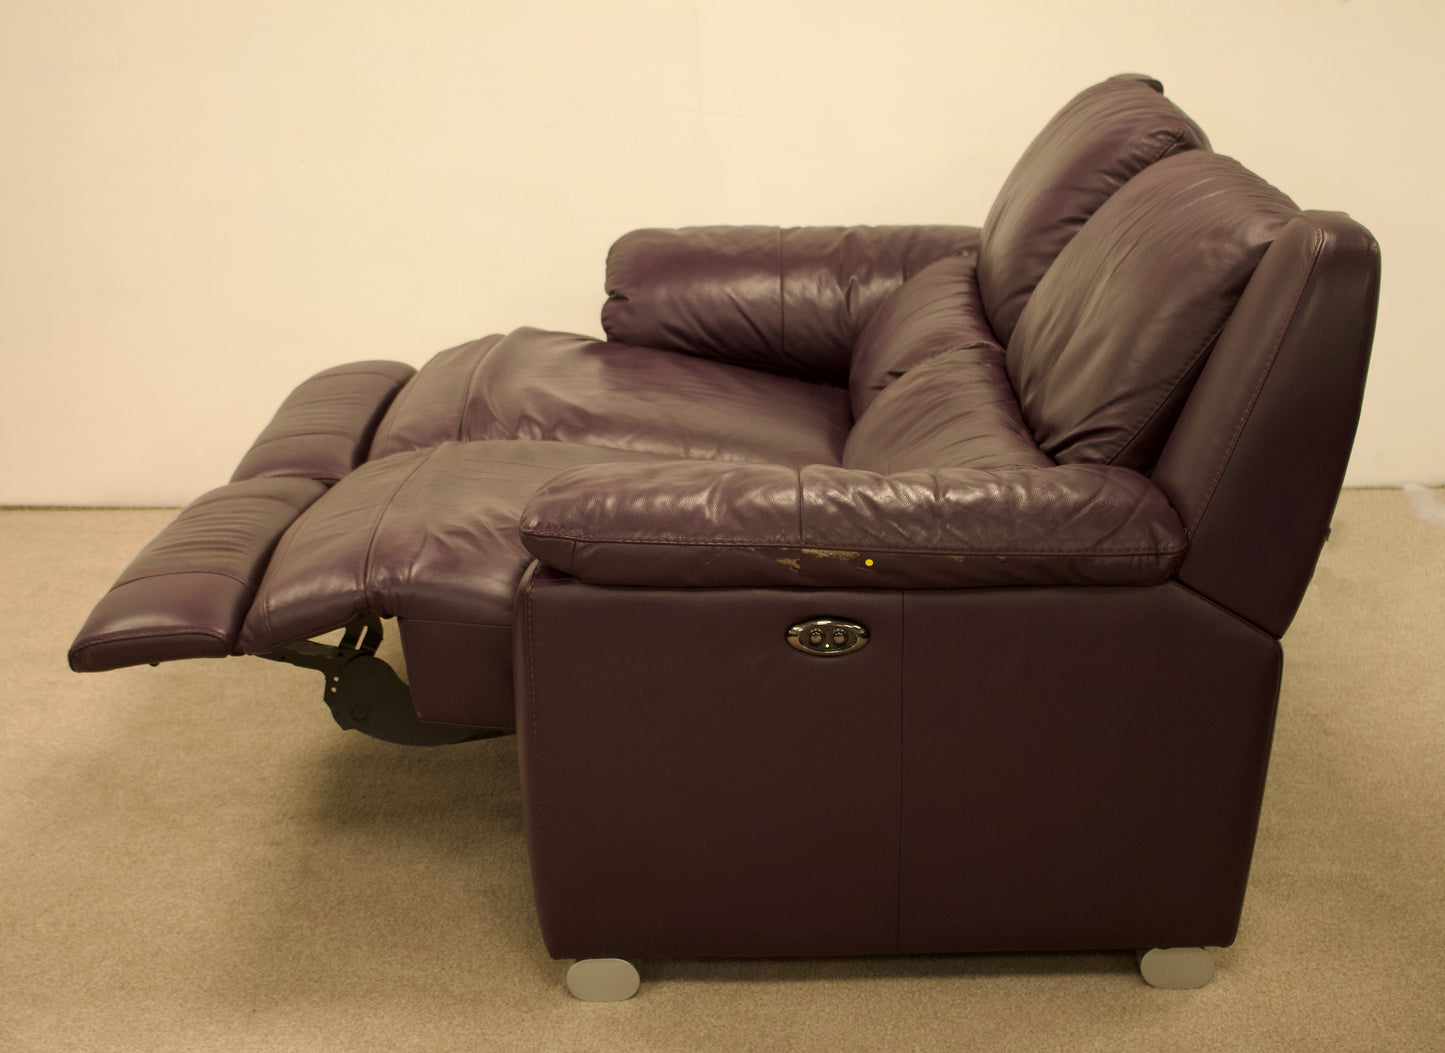 Two Seater Electric Recliner